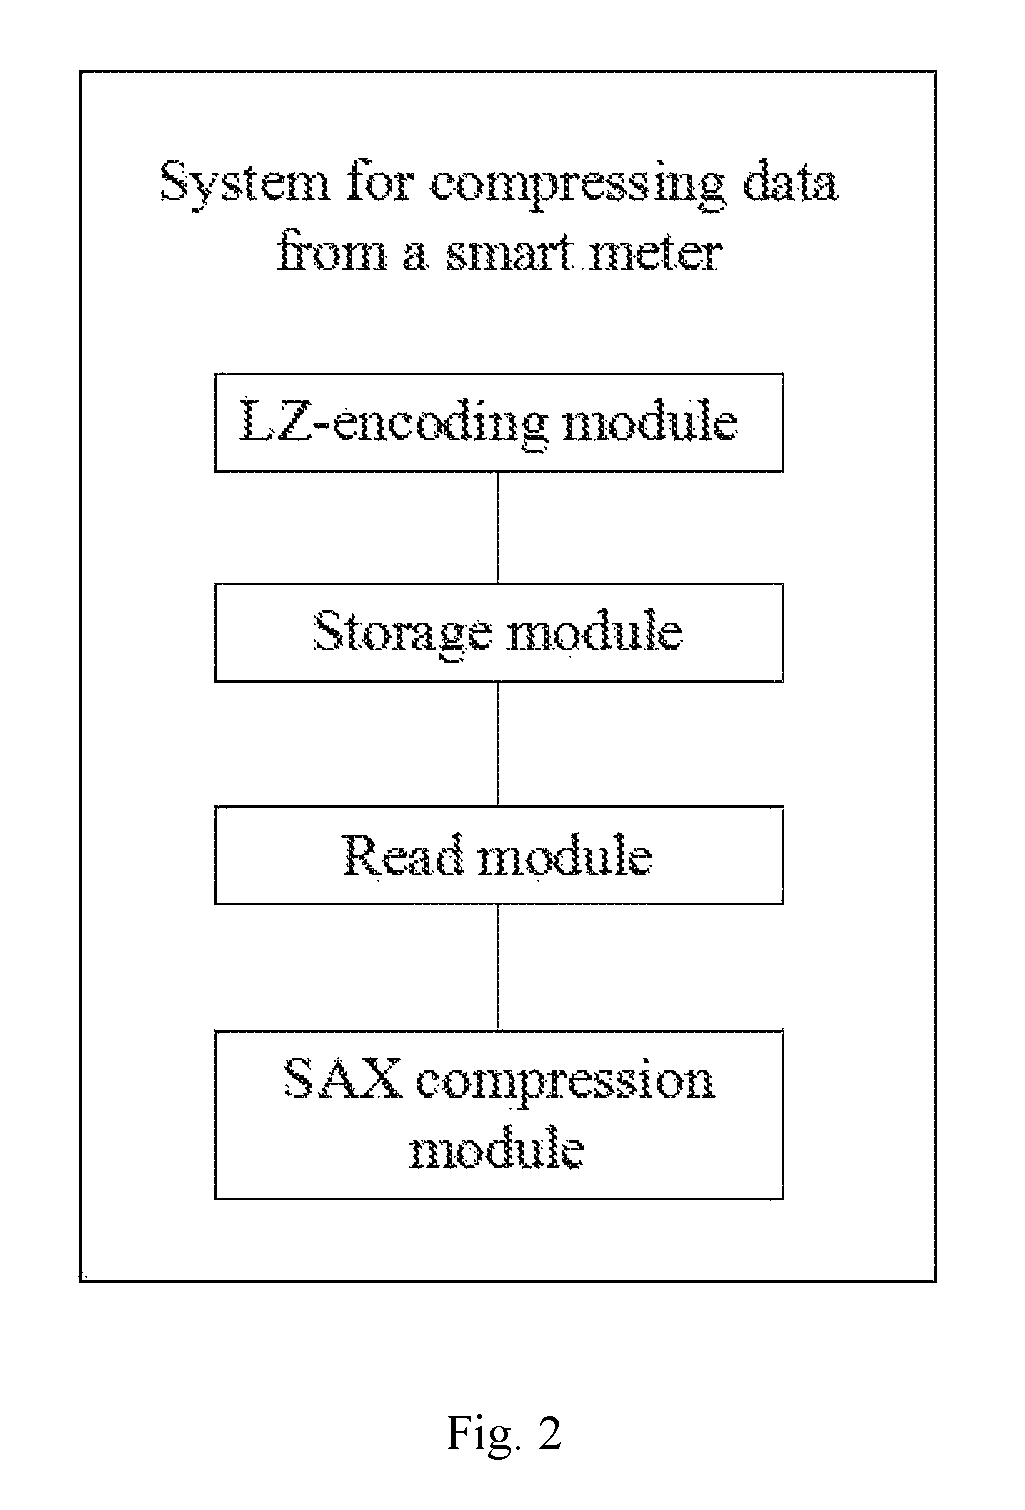 Method and system for compressing data from smart meter